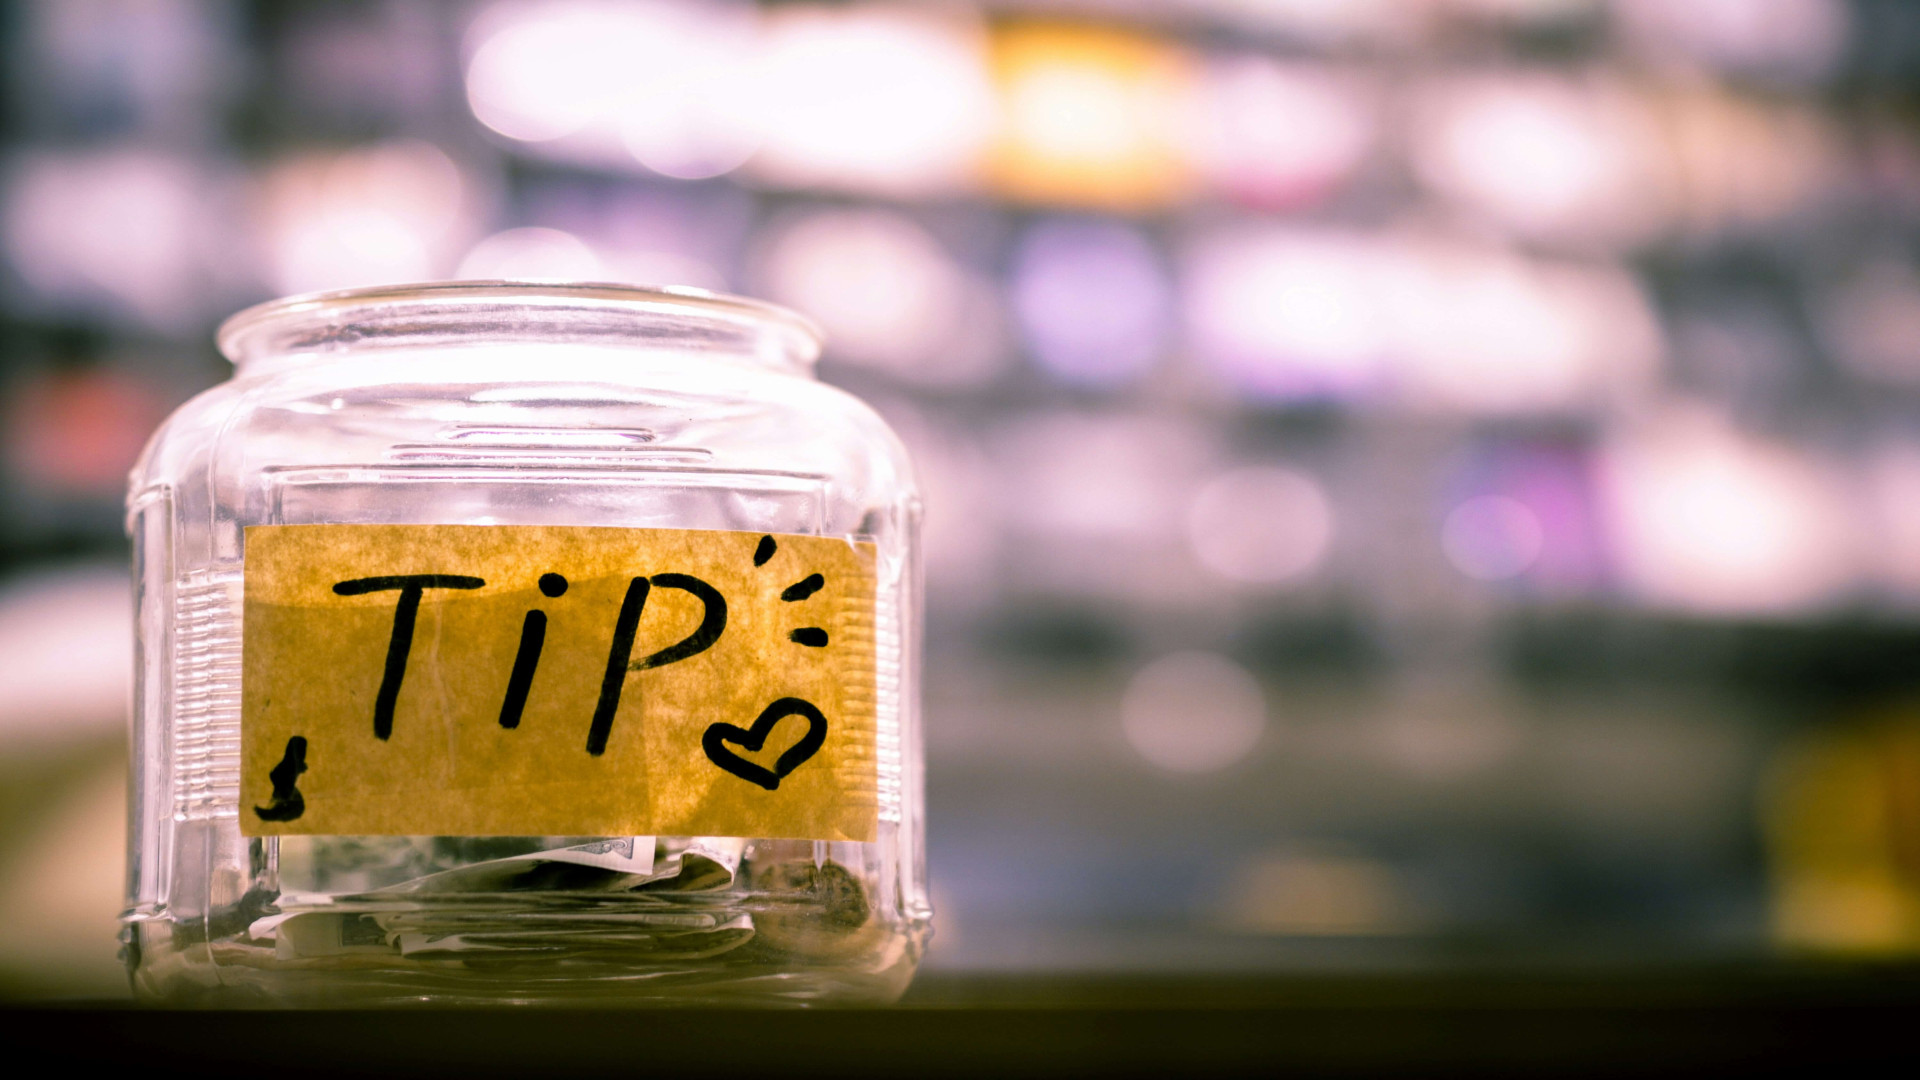 Tip policy at talbot hotel clonmel